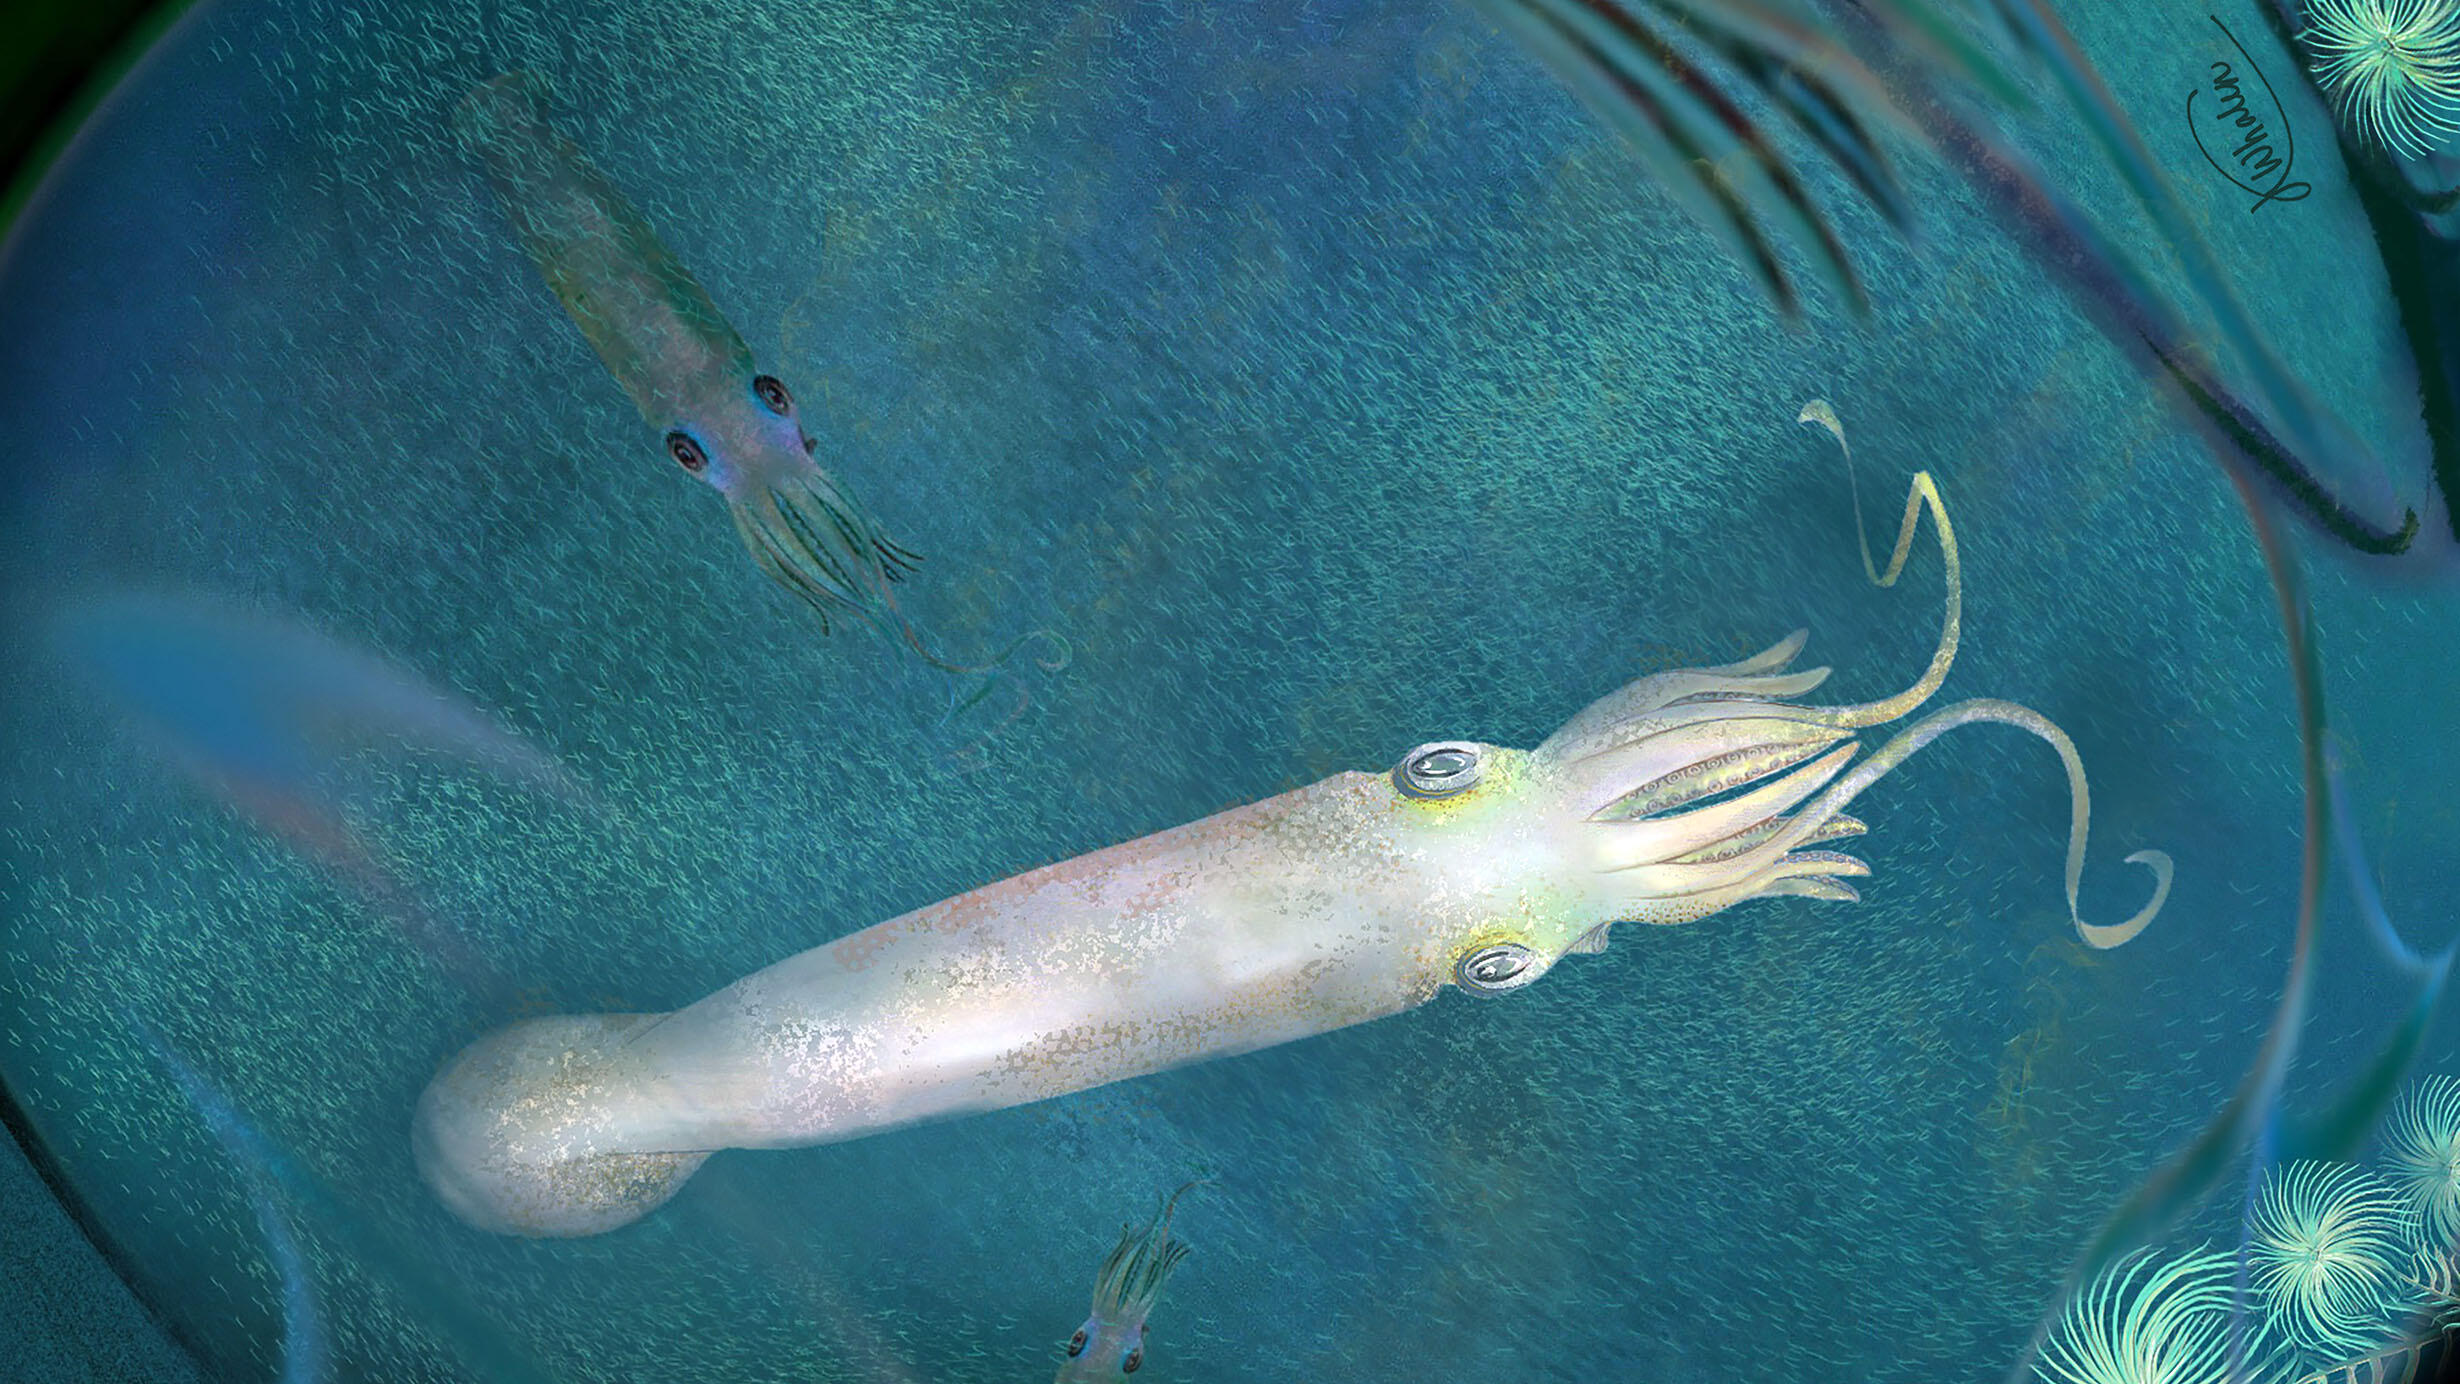 Artist rendering of this squid-like cephalopod ancestor depicts ten arms, instead of the eight seen in today's squids.